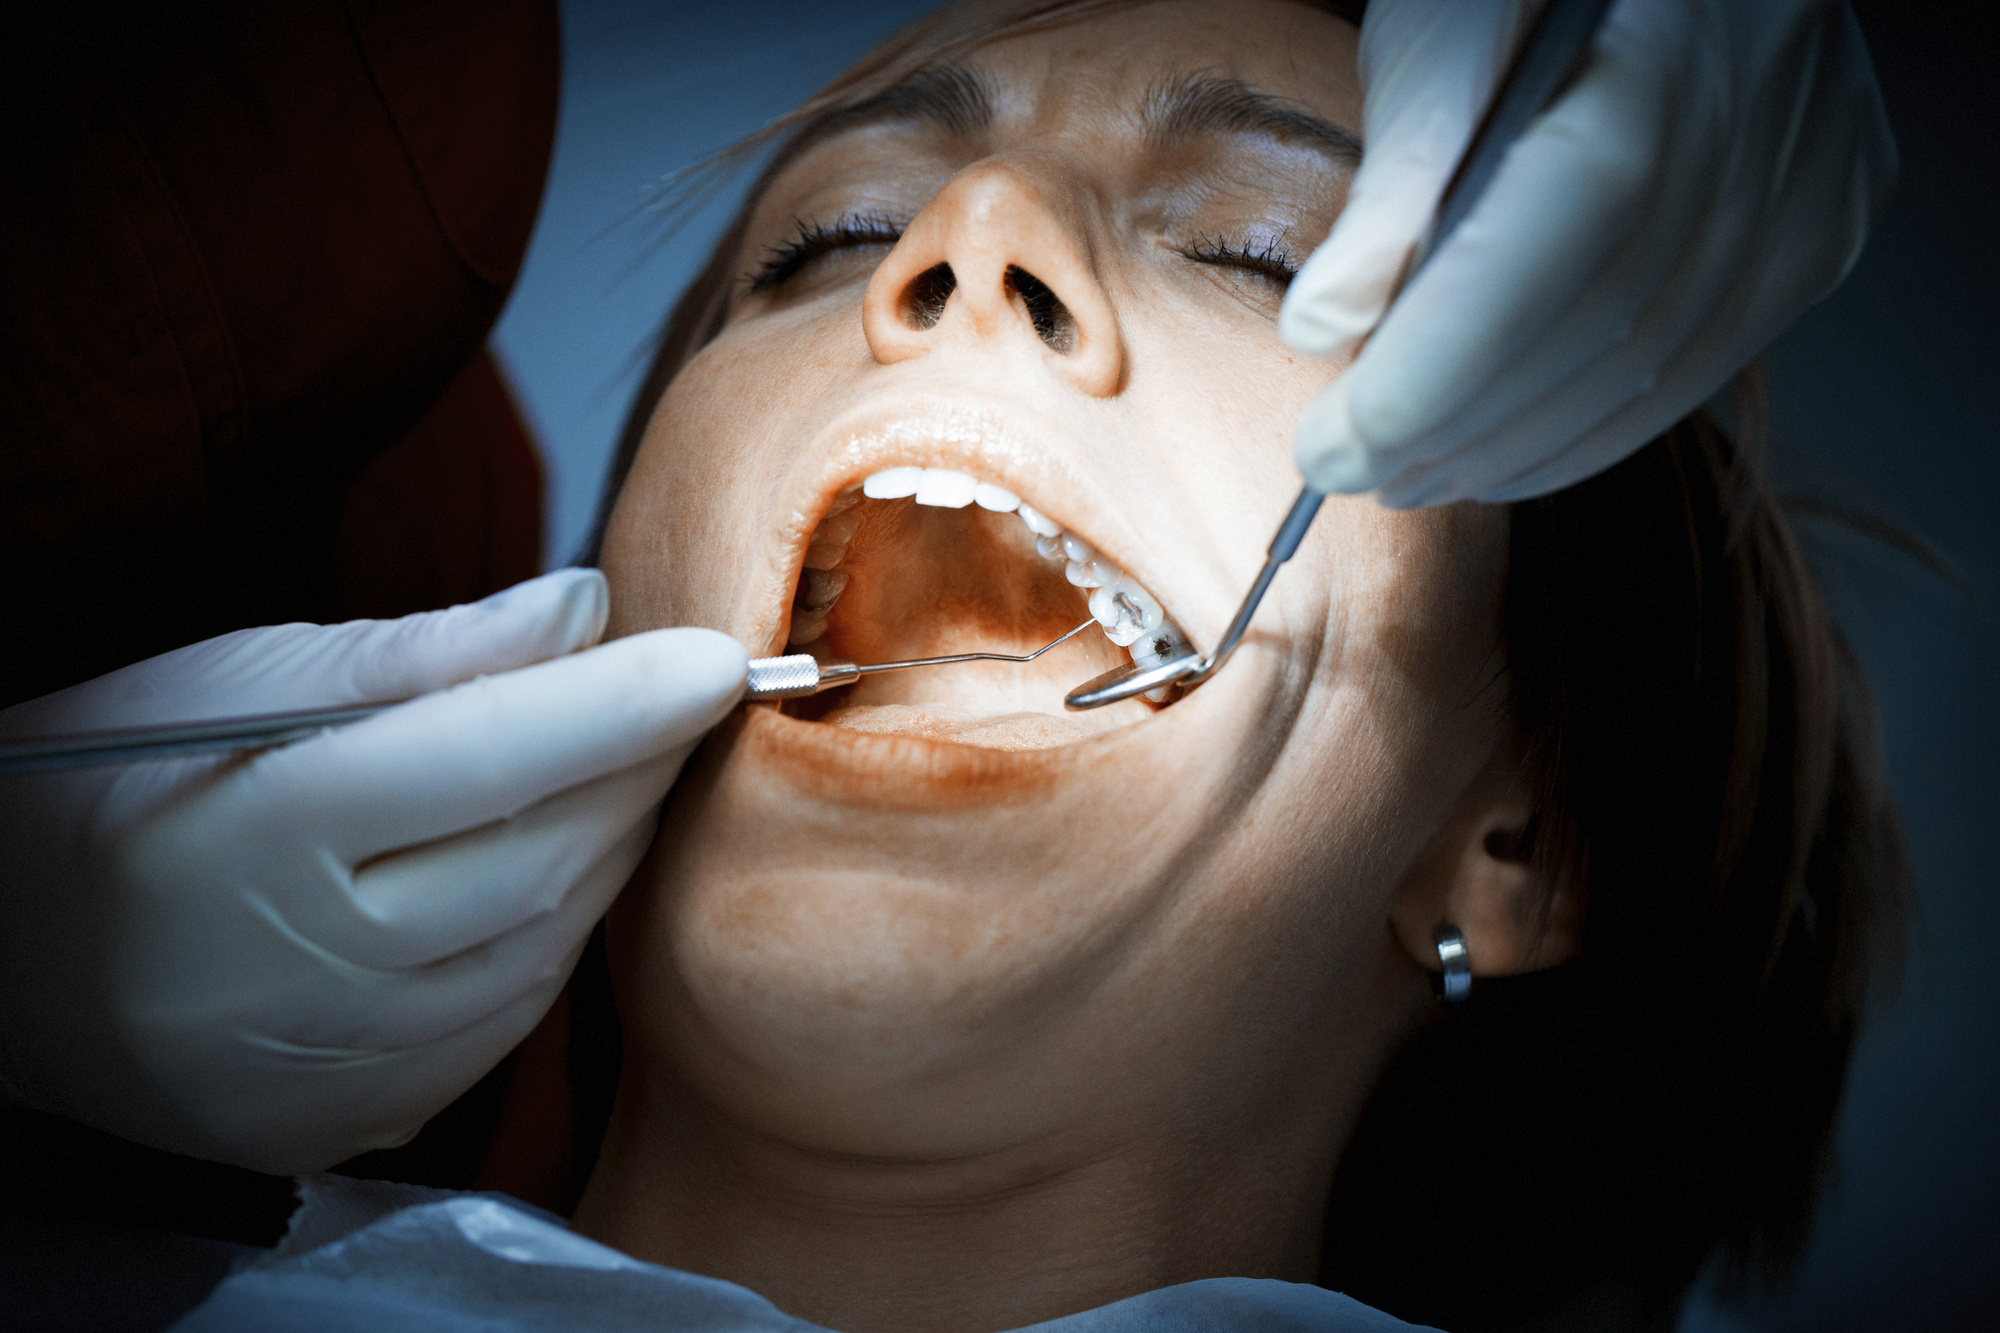 Getting a cavity filled can be a nerve-racking experience. We're here to help prepare you for the process with this detailed guide on what to expect.